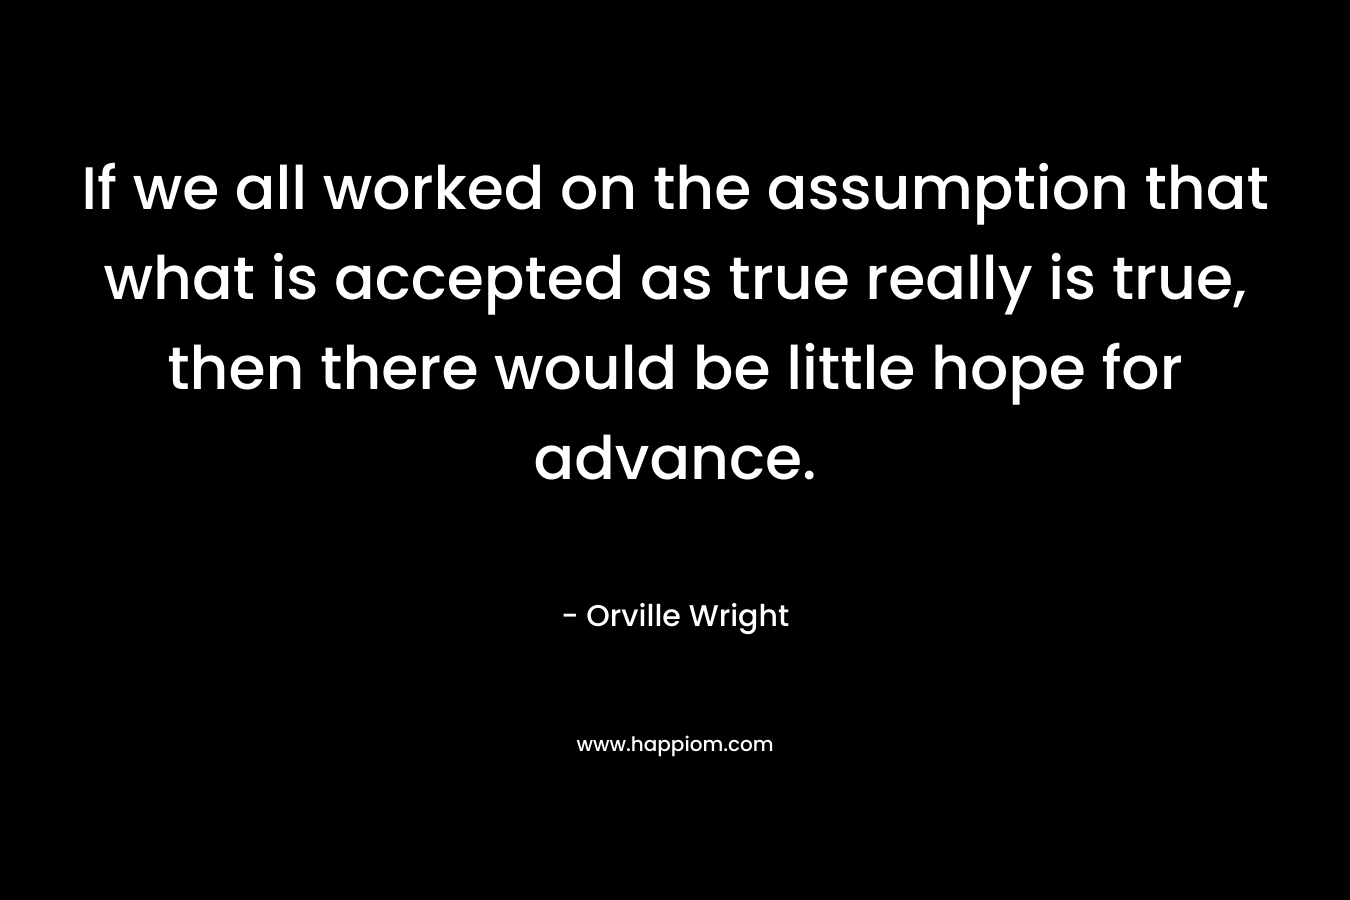 If we all worked on the assumption that what is accepted as true really is true, then there would be little hope for advance. – Orville Wright